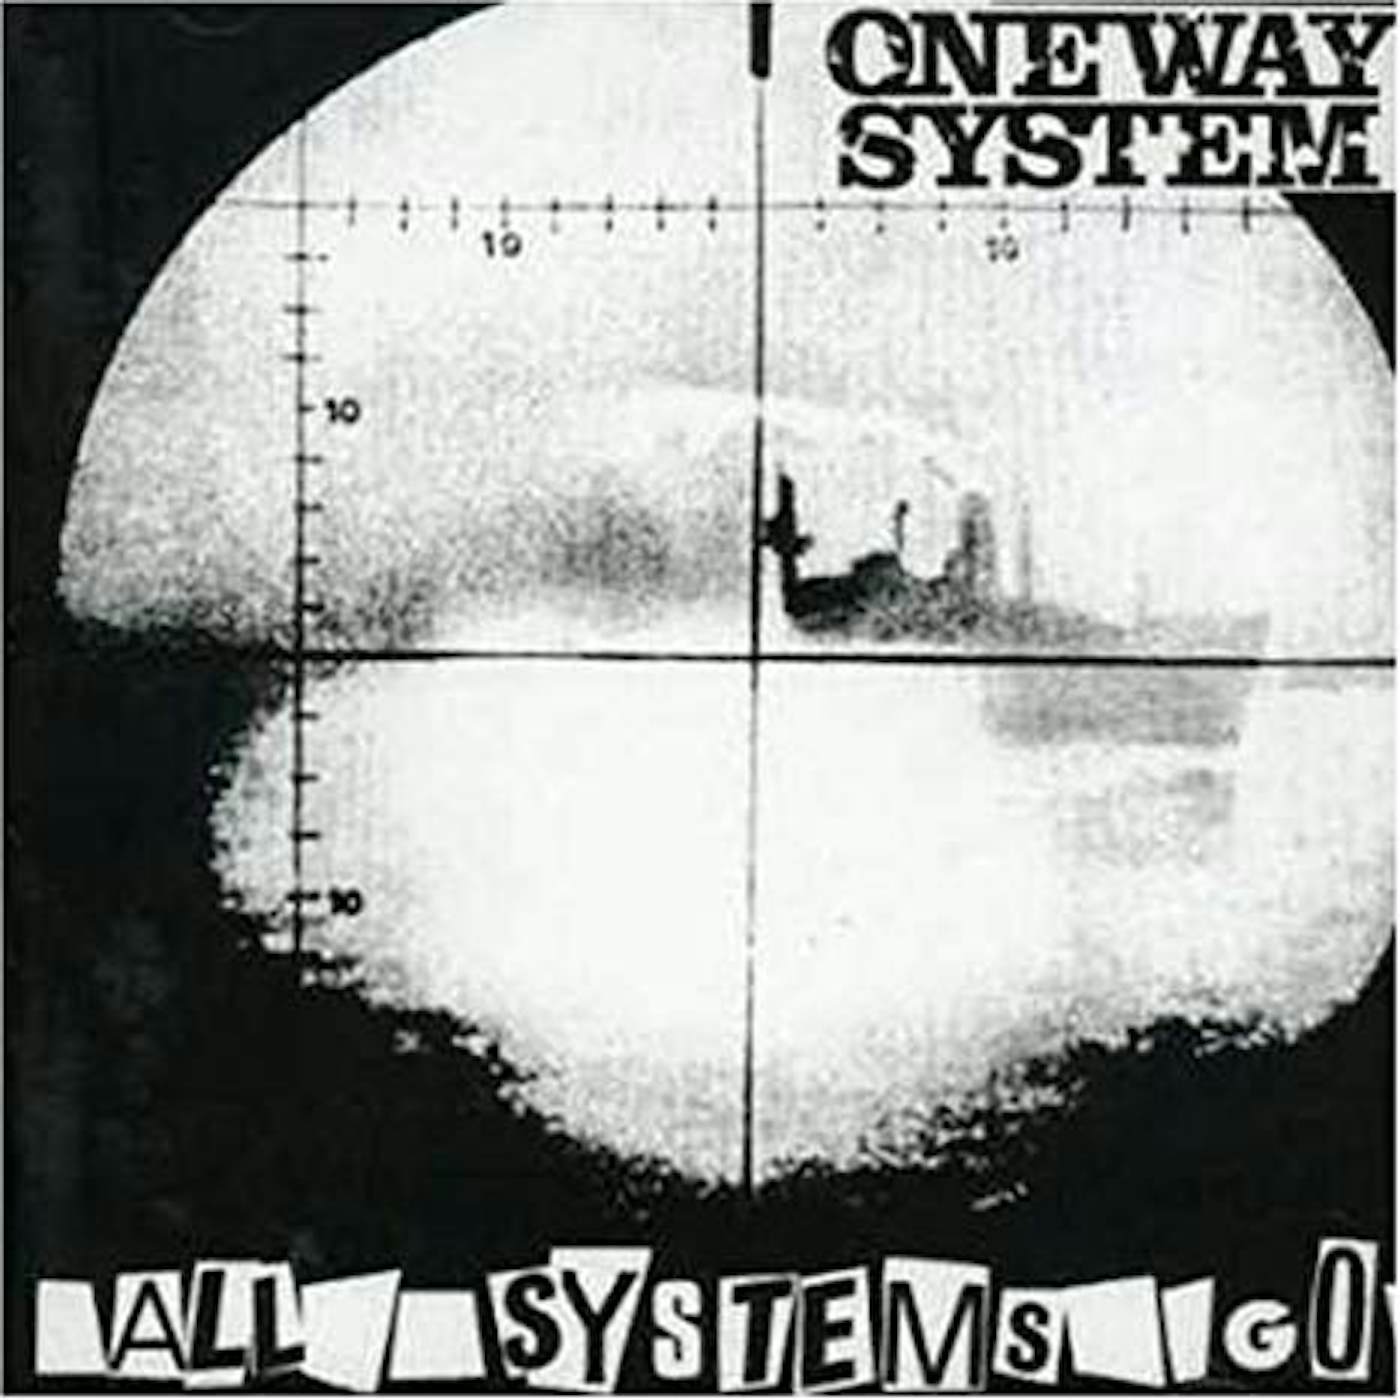 One Way System GIVE US A FUTURE: SINGLES & DEMOS Vinyl Record